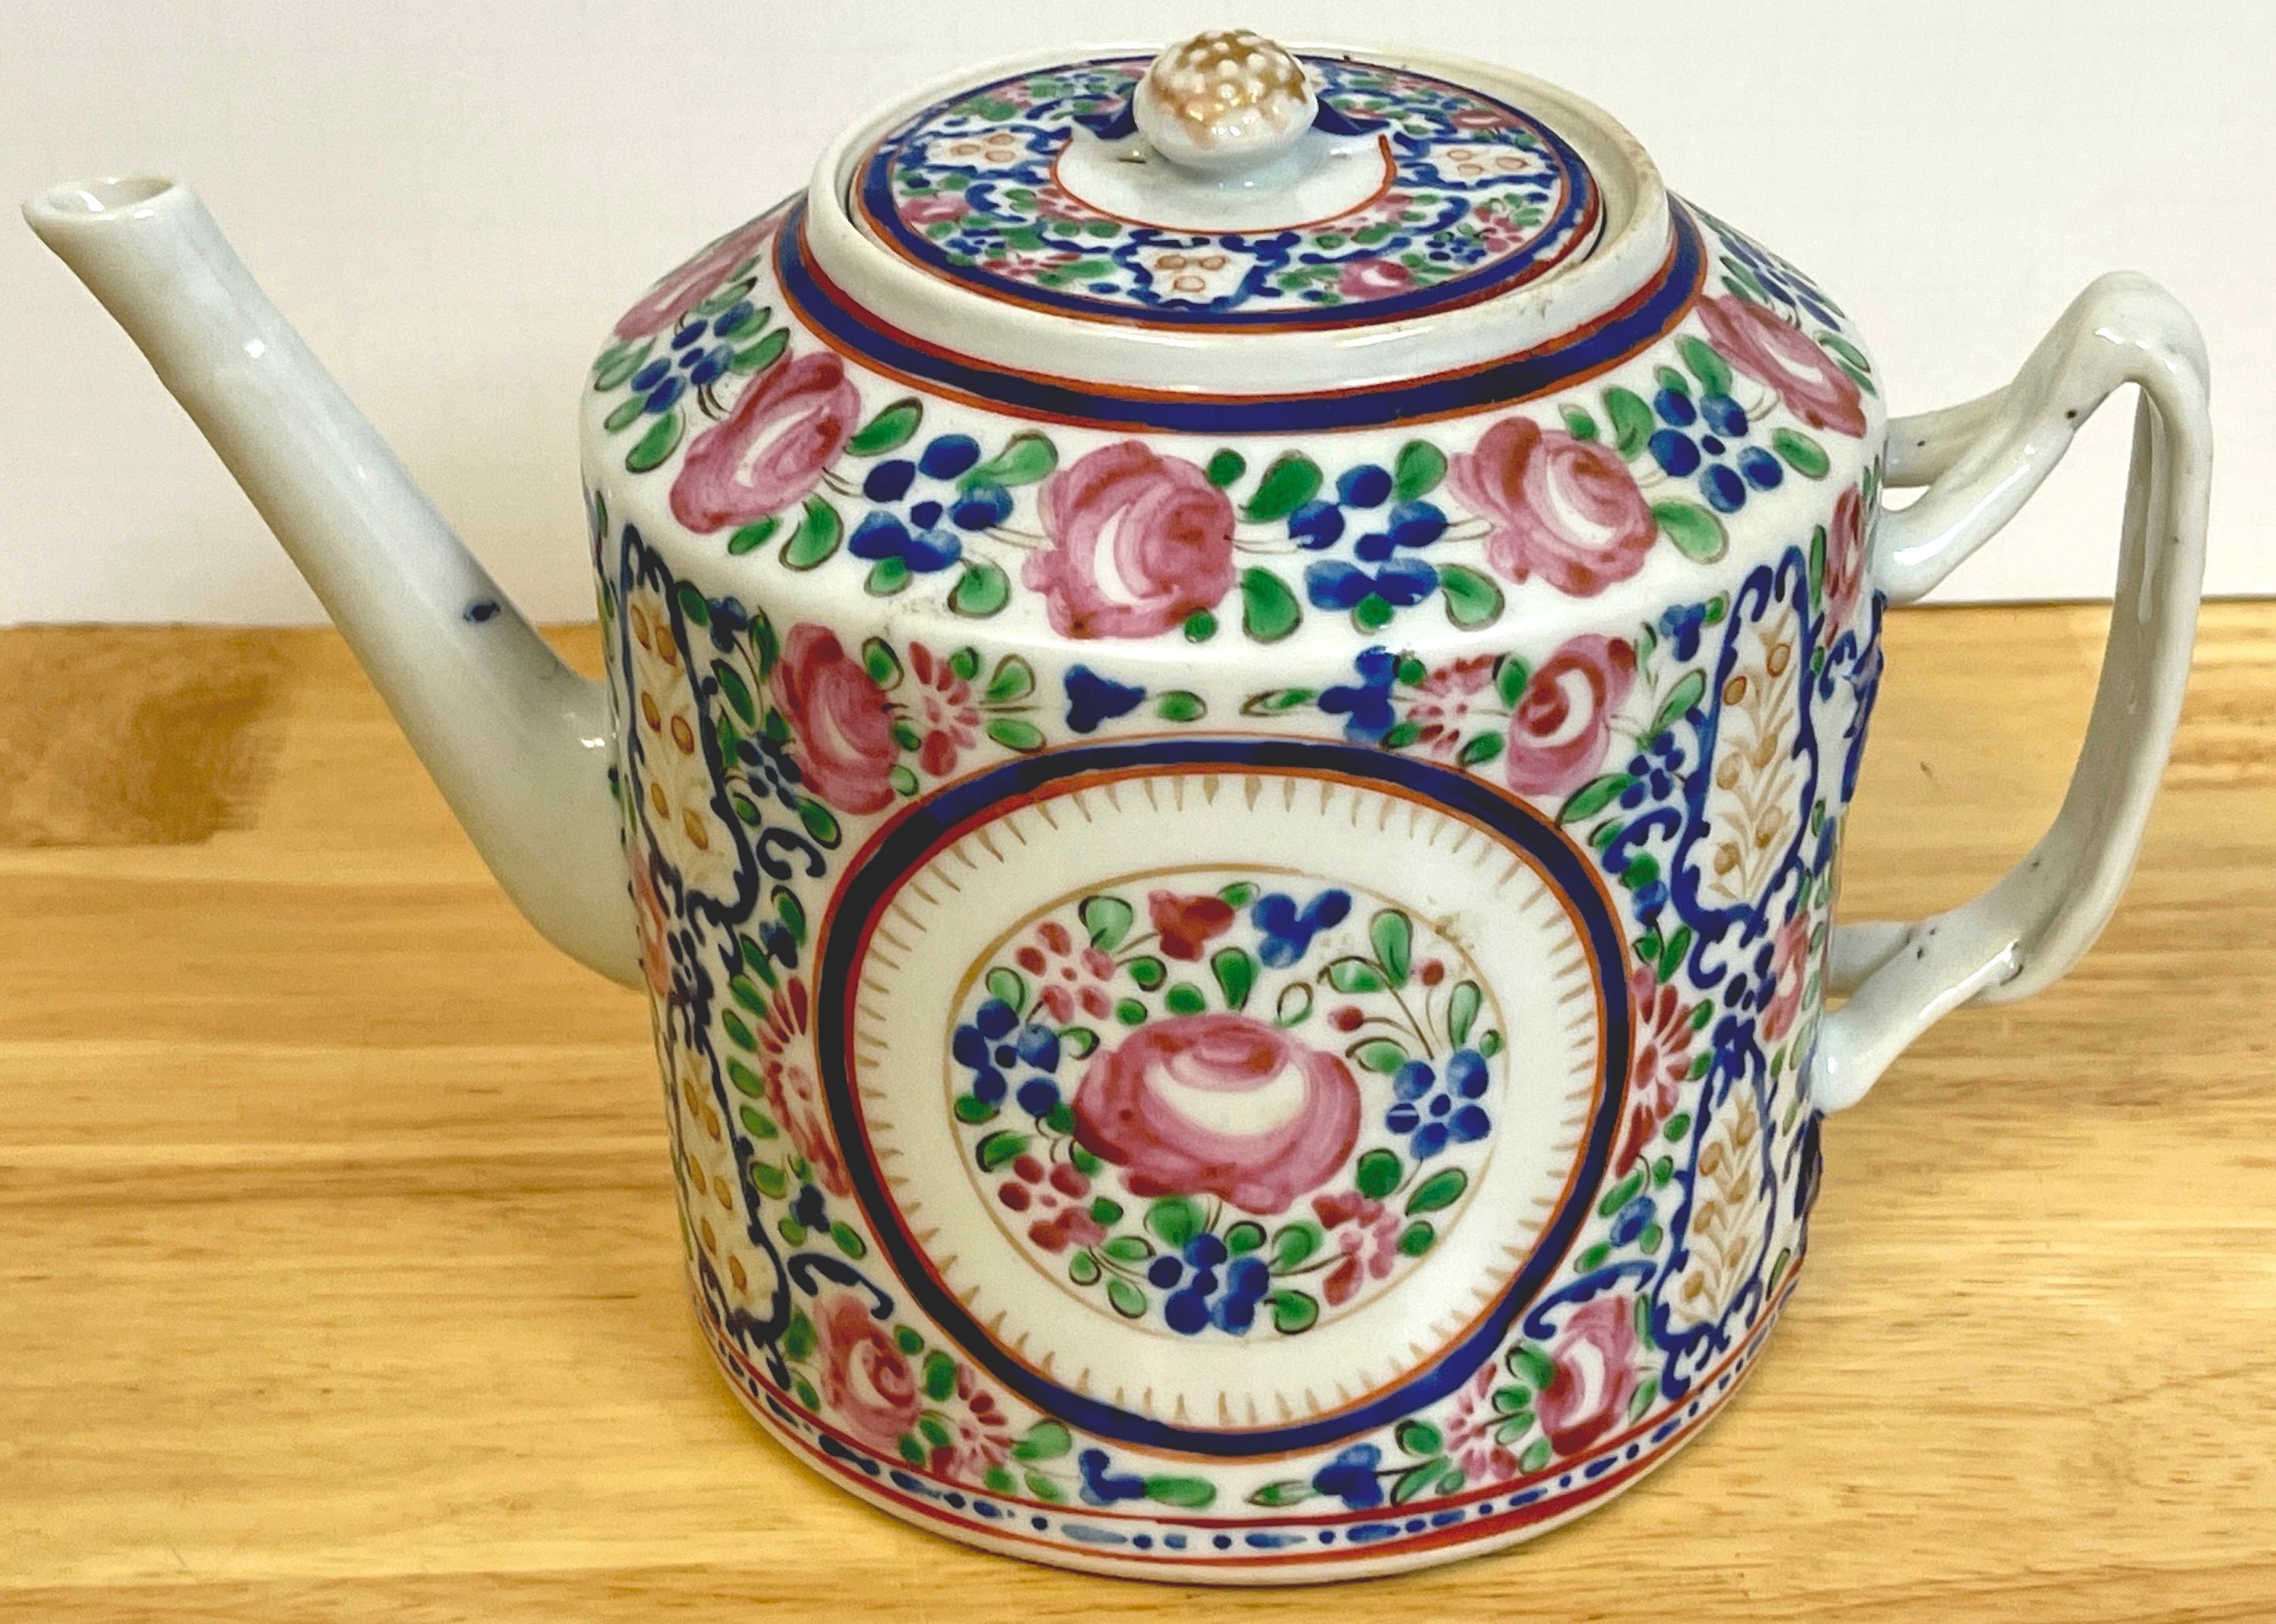 18th C Chinese Export Famille rose tea pot, in the French taste, of typical form the drum shape with twisted strap handles, and straight angled spout. The body with 'Sevres' style famille rose continuous decoration.